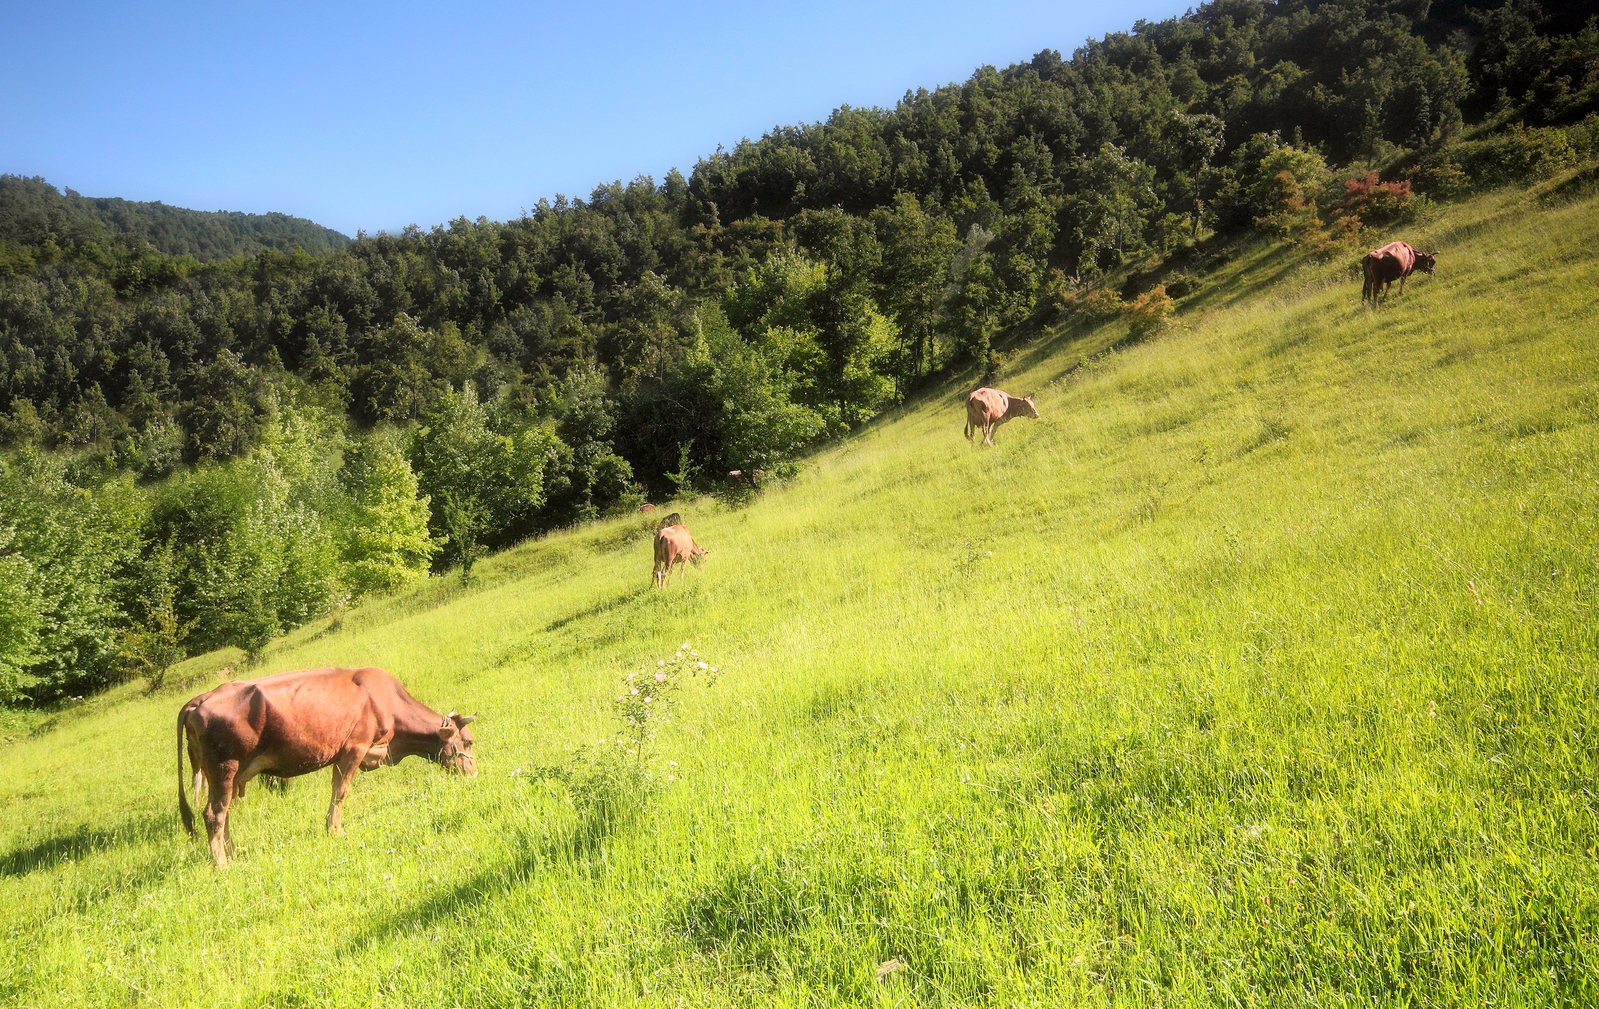 some cows graze on some very green grass